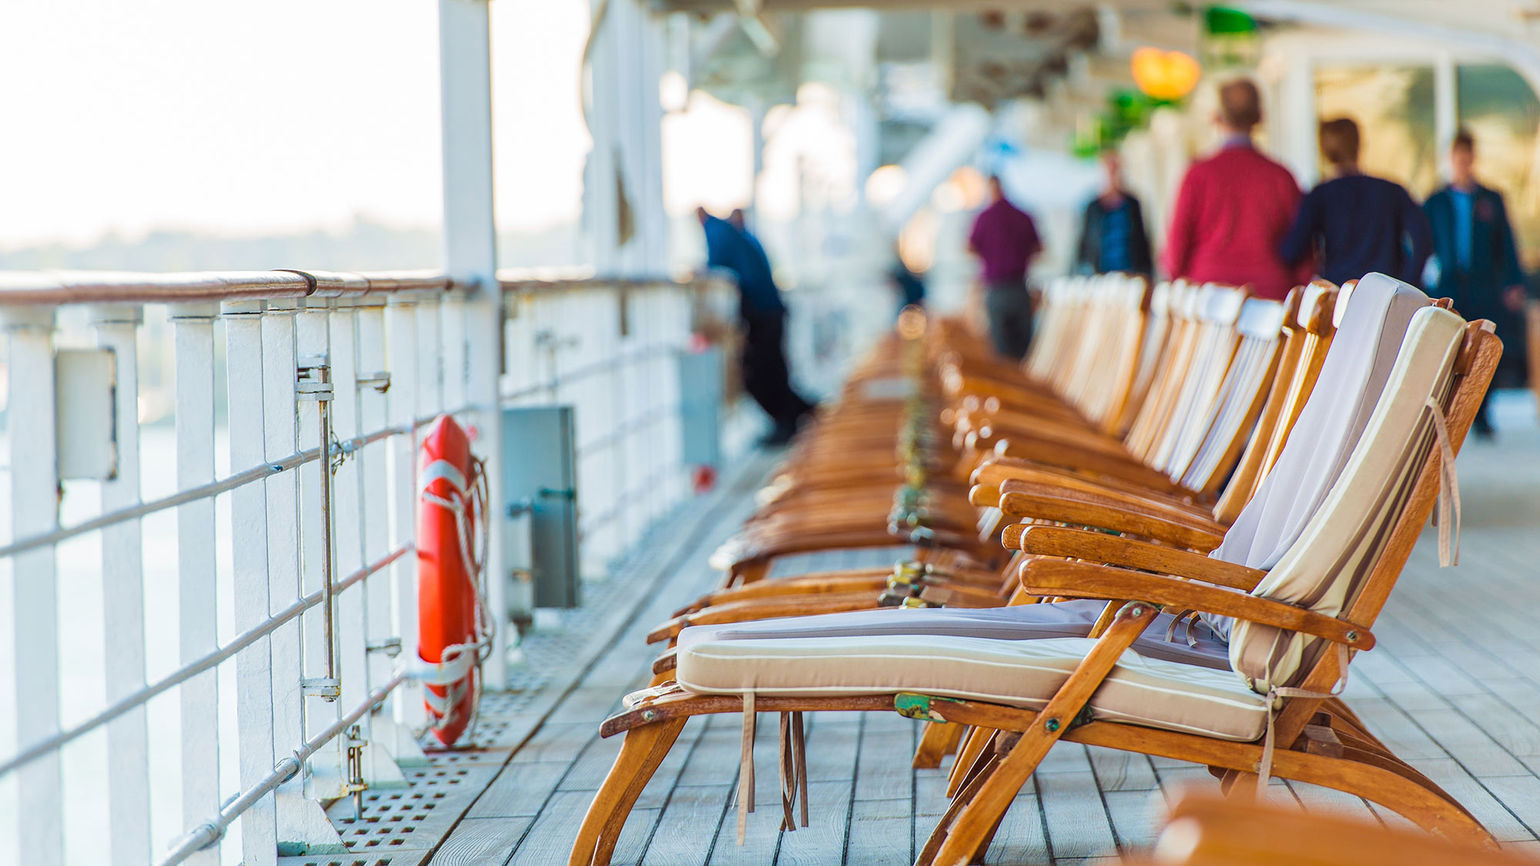 CDC reports nearly 1,400 Covid cases on U.S. cruise ships from July to October